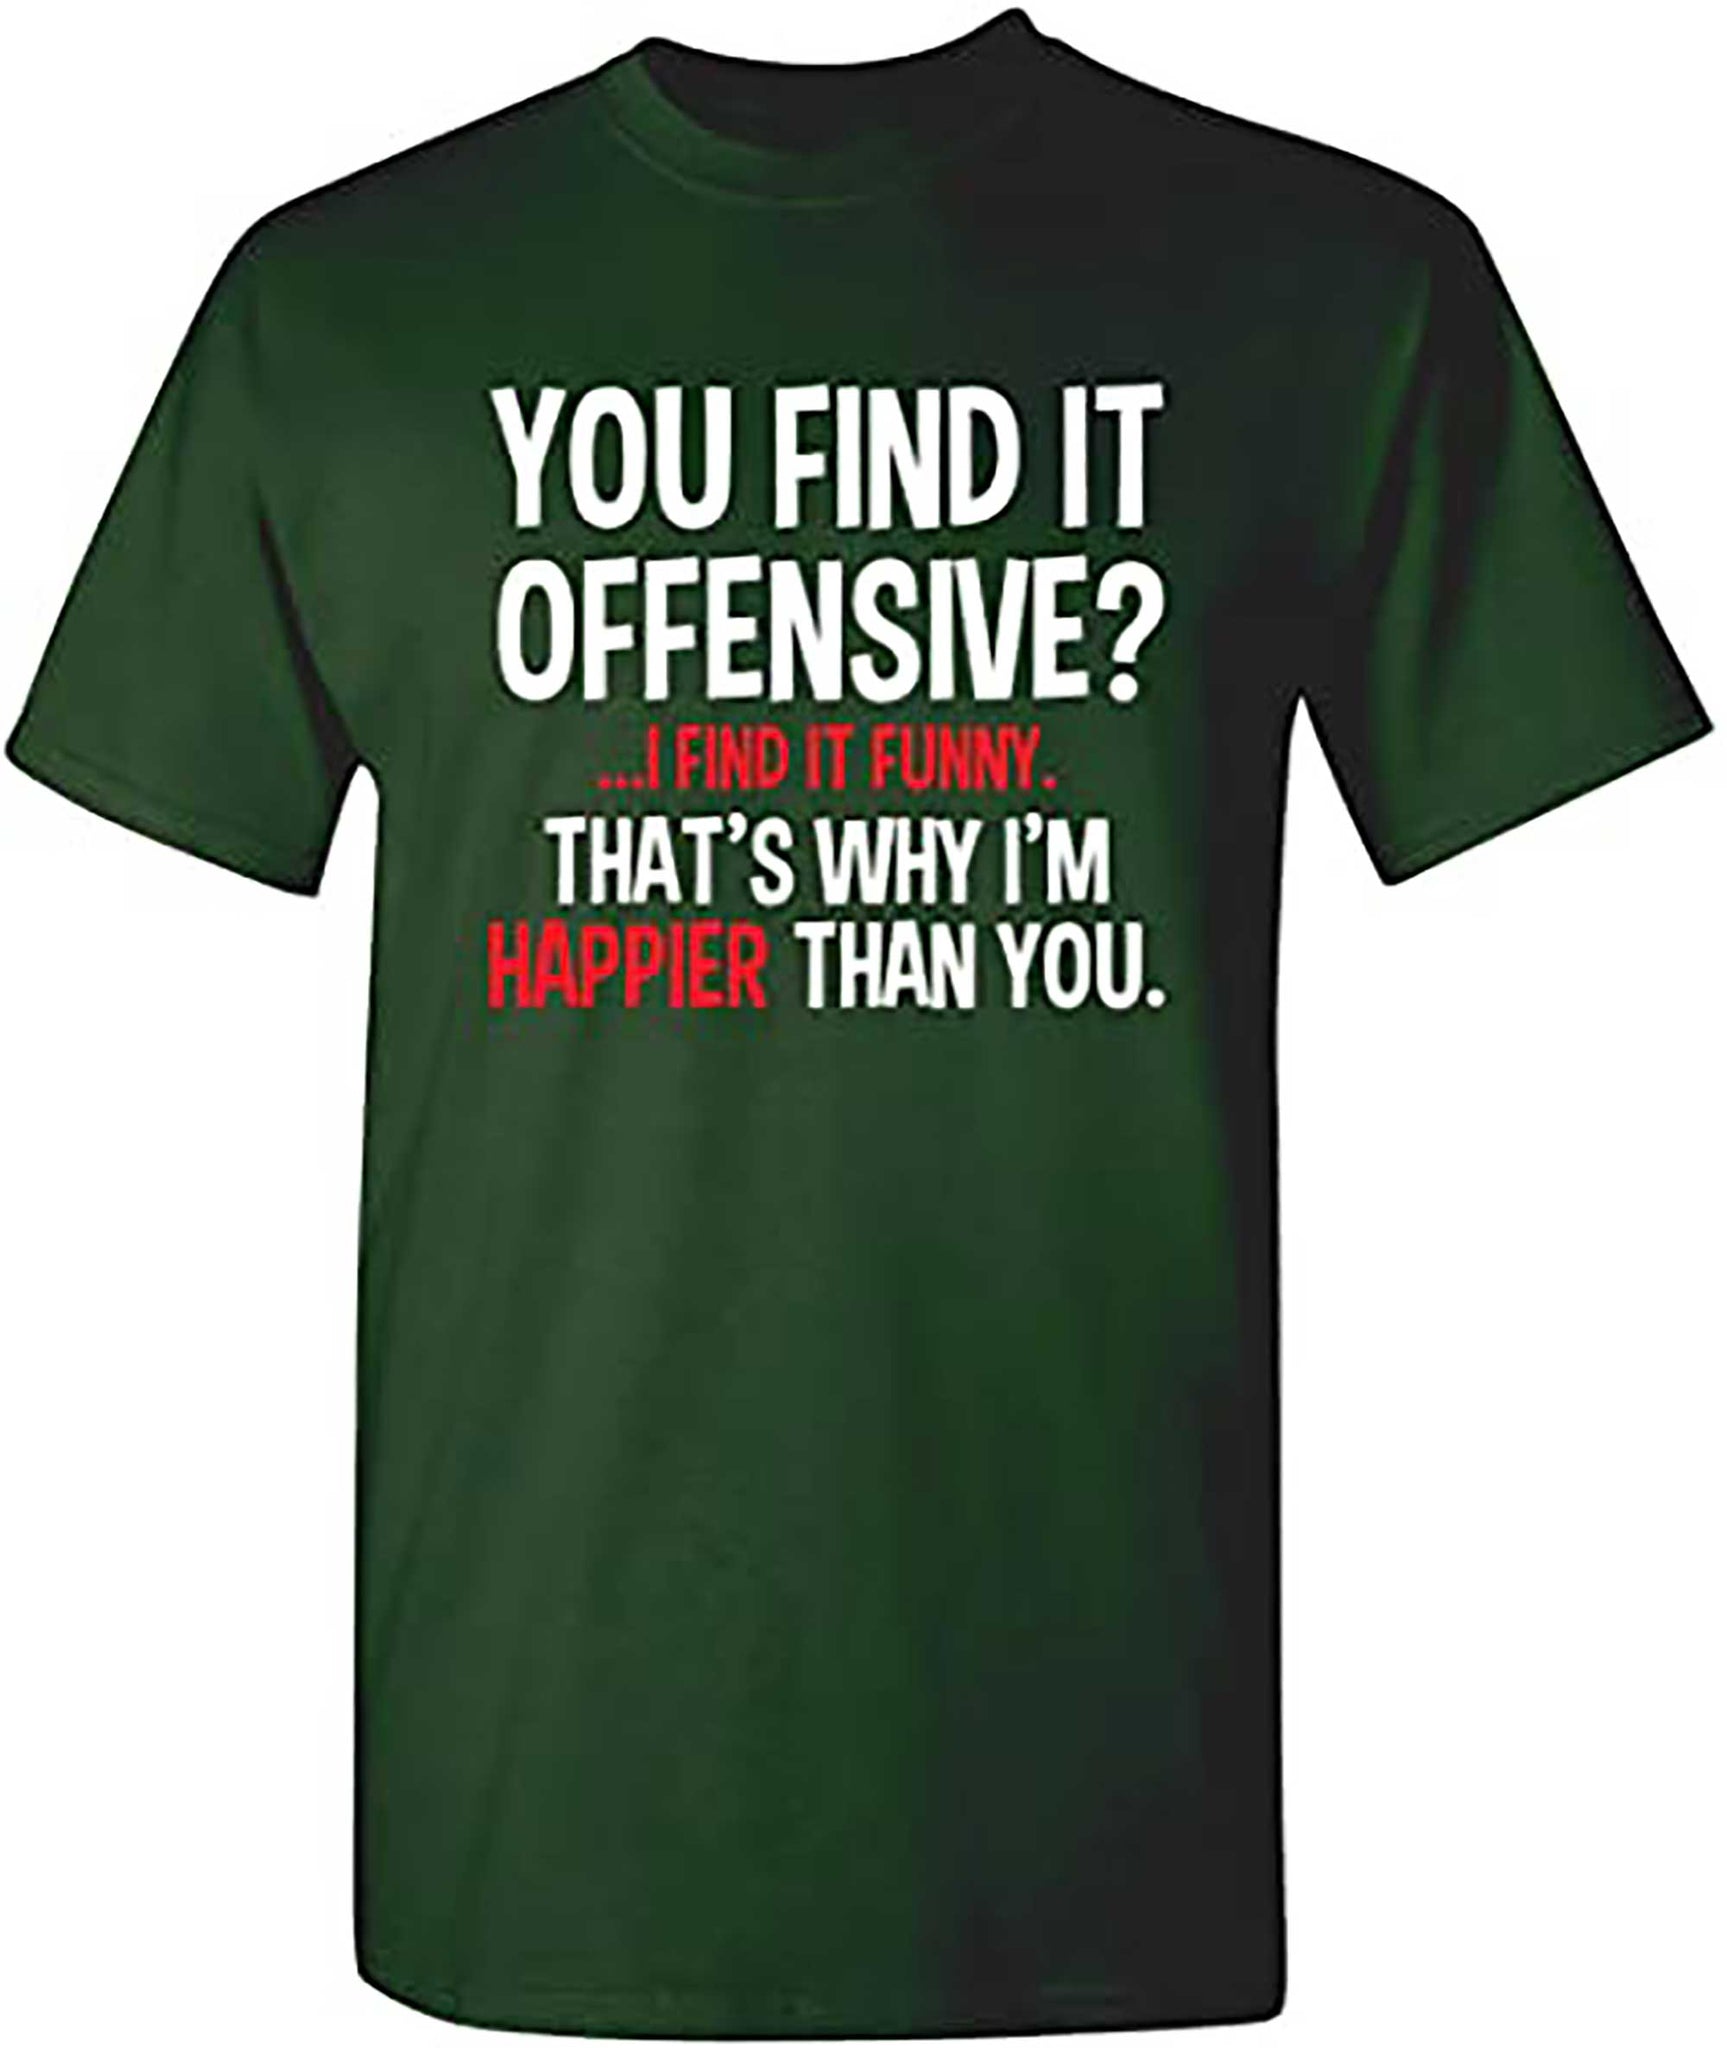 Skitongift You Find It Offensive I Find It Funny Humorous Graphic Mens Funny T Shirt